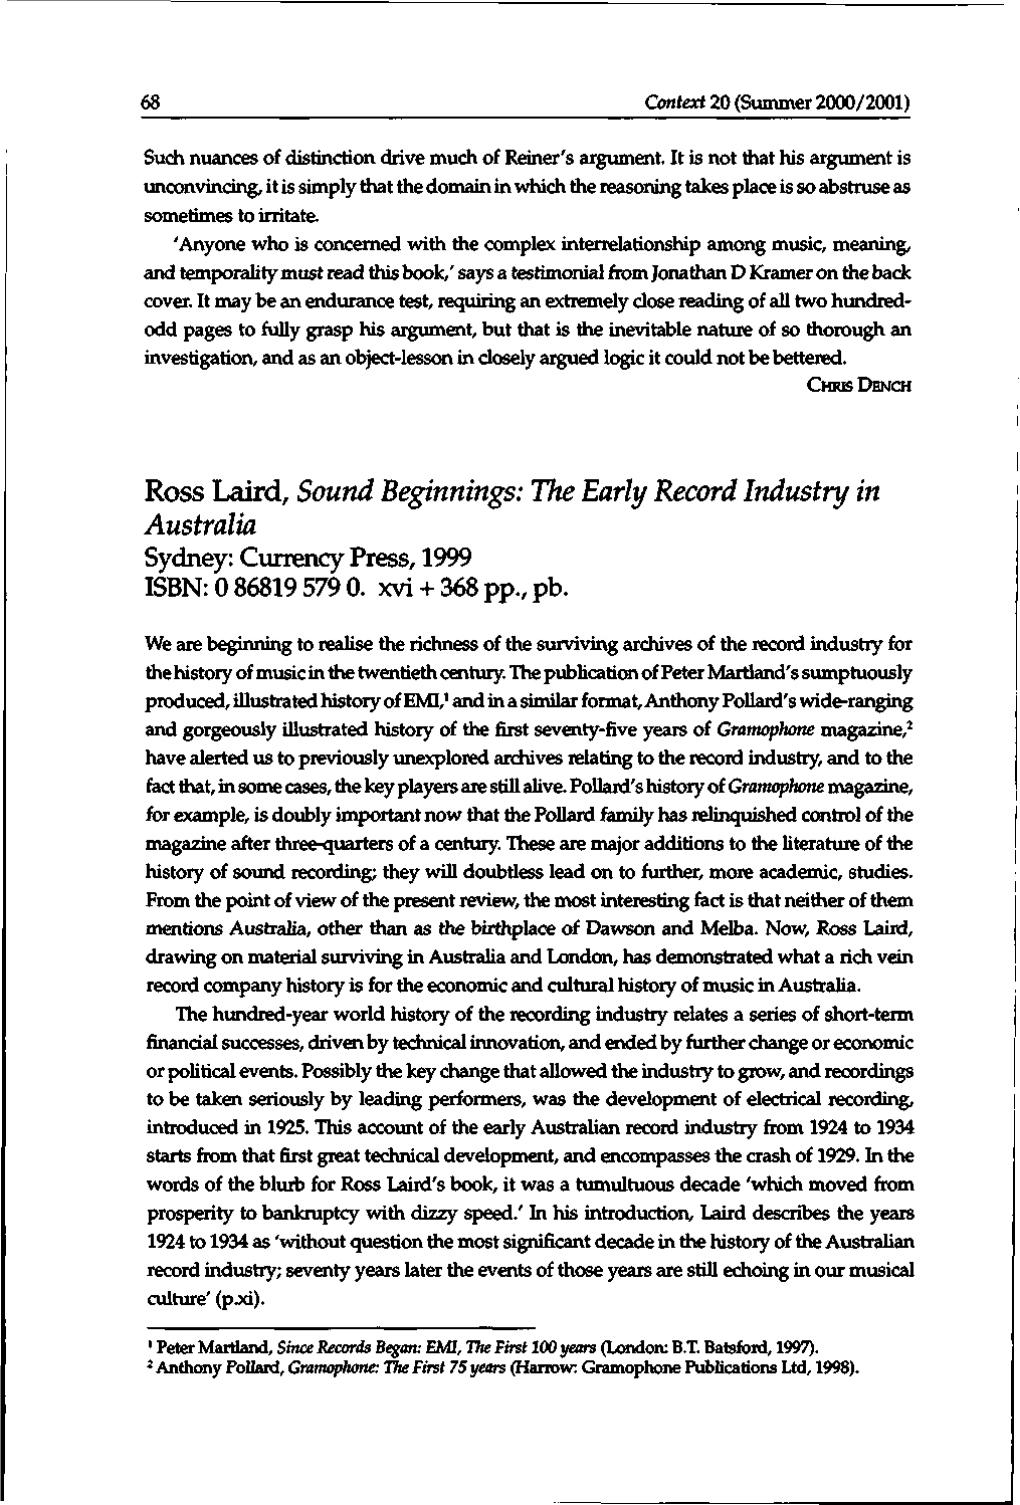 Ross Laird, Sound Beginnings: the Early Record Industry in Australia Sydney: Currency Press, 1999 ISBN: 0 86819 579 0